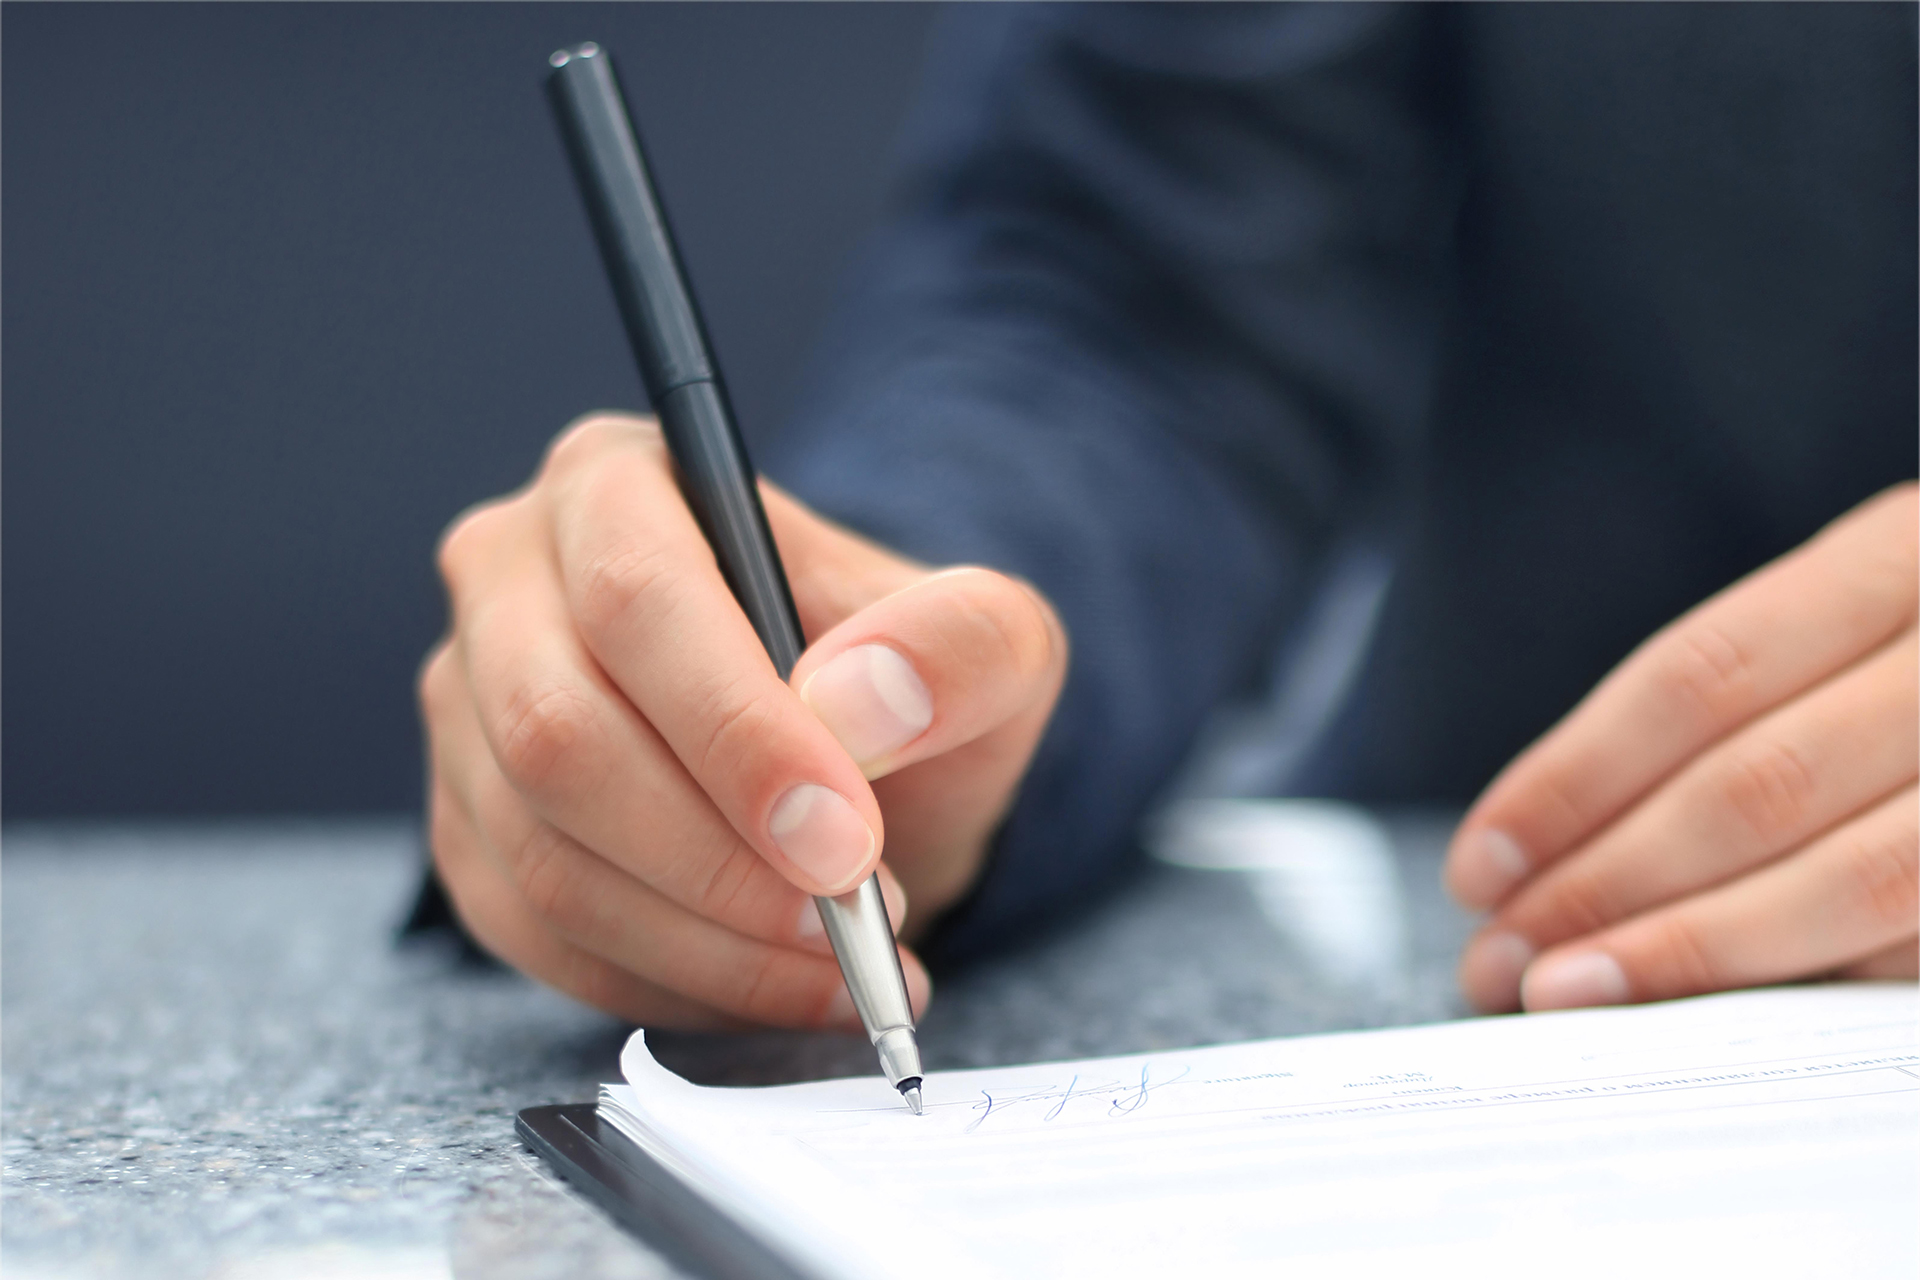 Properly Drafting An Affidavit Document Requires Avoiding of Hearsay,  Opinions (unless an expert), and ConclusionsAnderson Aylwin Begg & Co. Oshawa(905) 686-8080